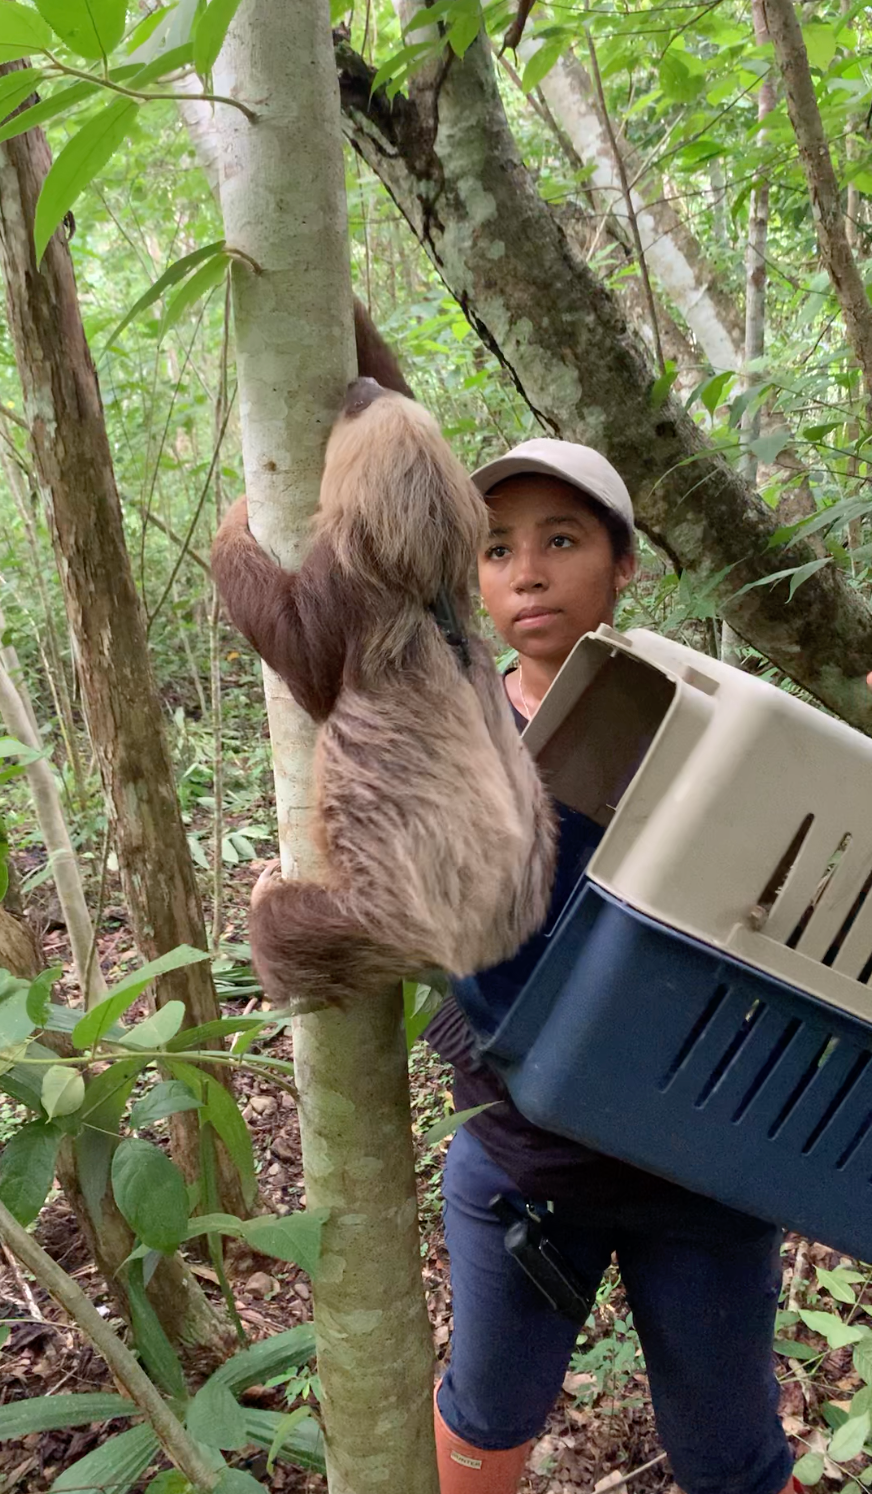 Protecting the sloth: SIU grad student studies relocation success in Central America